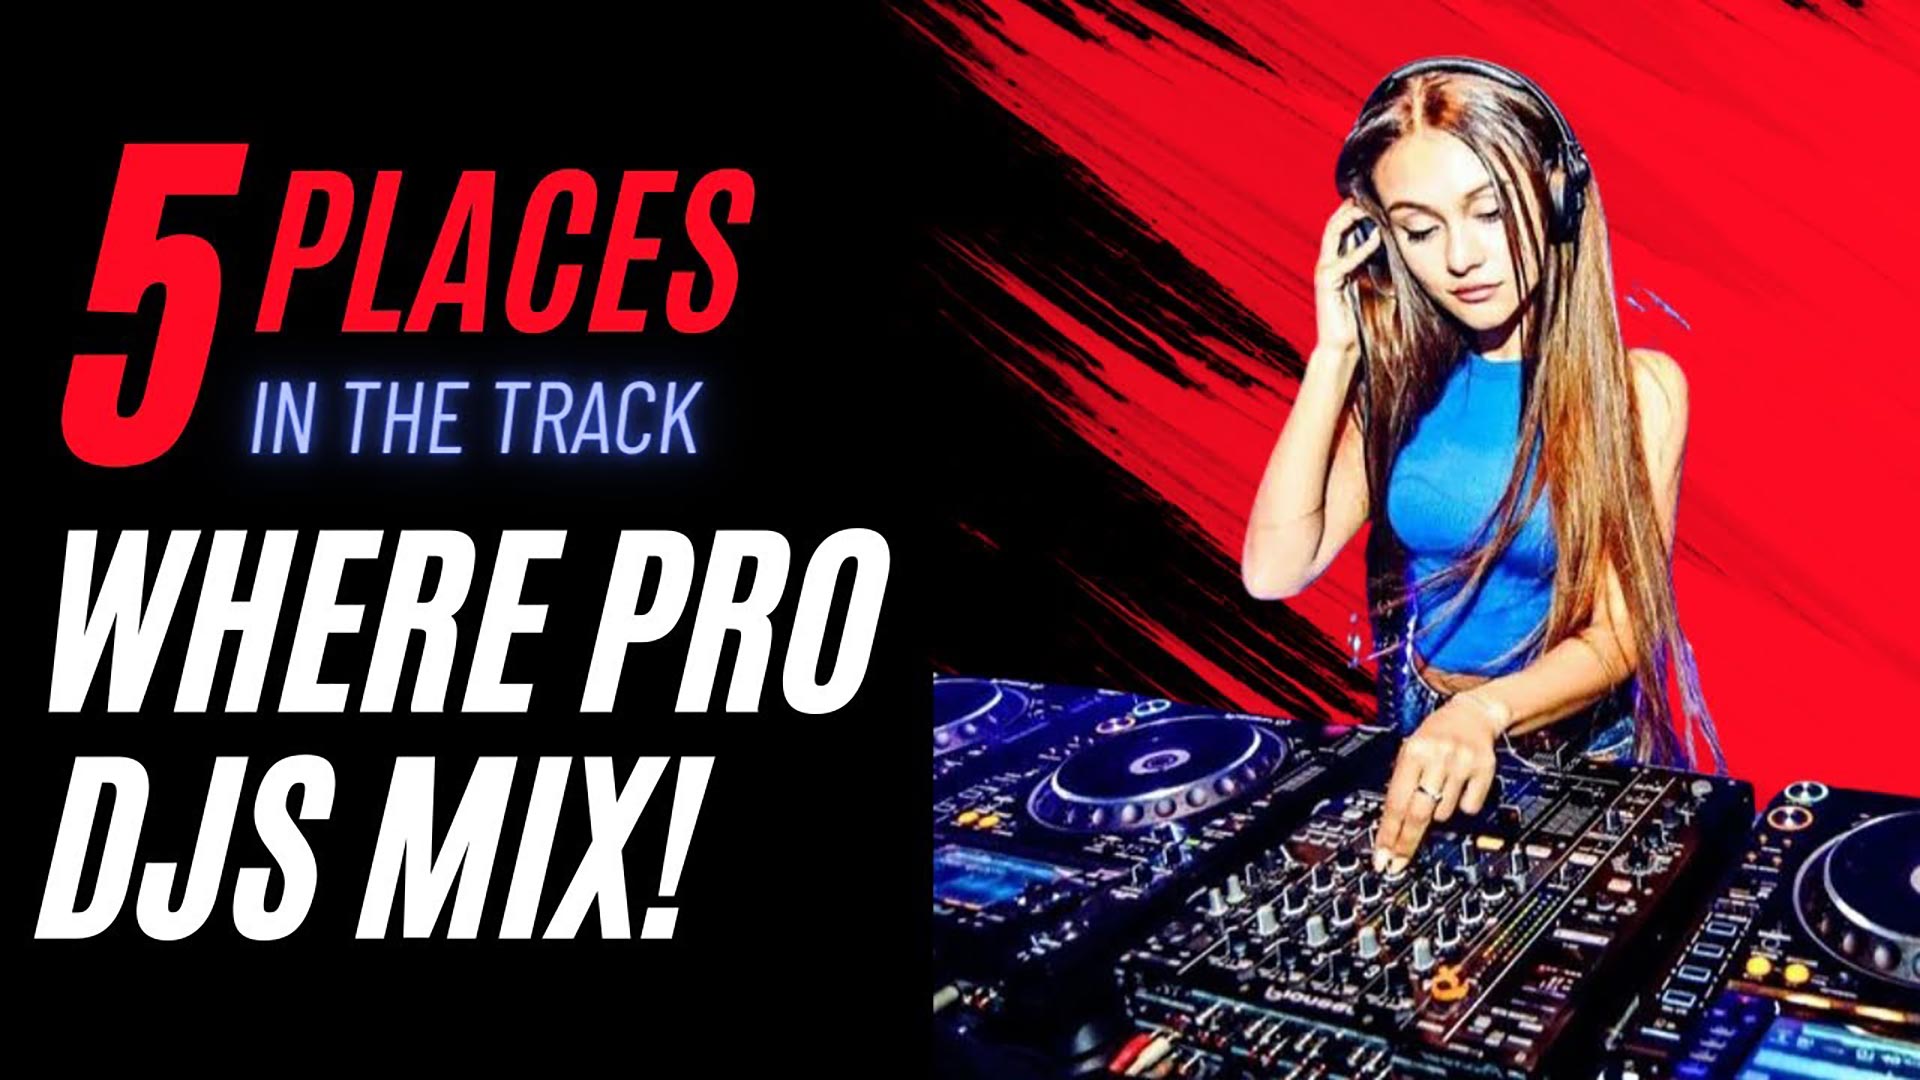 5 Places in the Track PRO DJS MIX Image